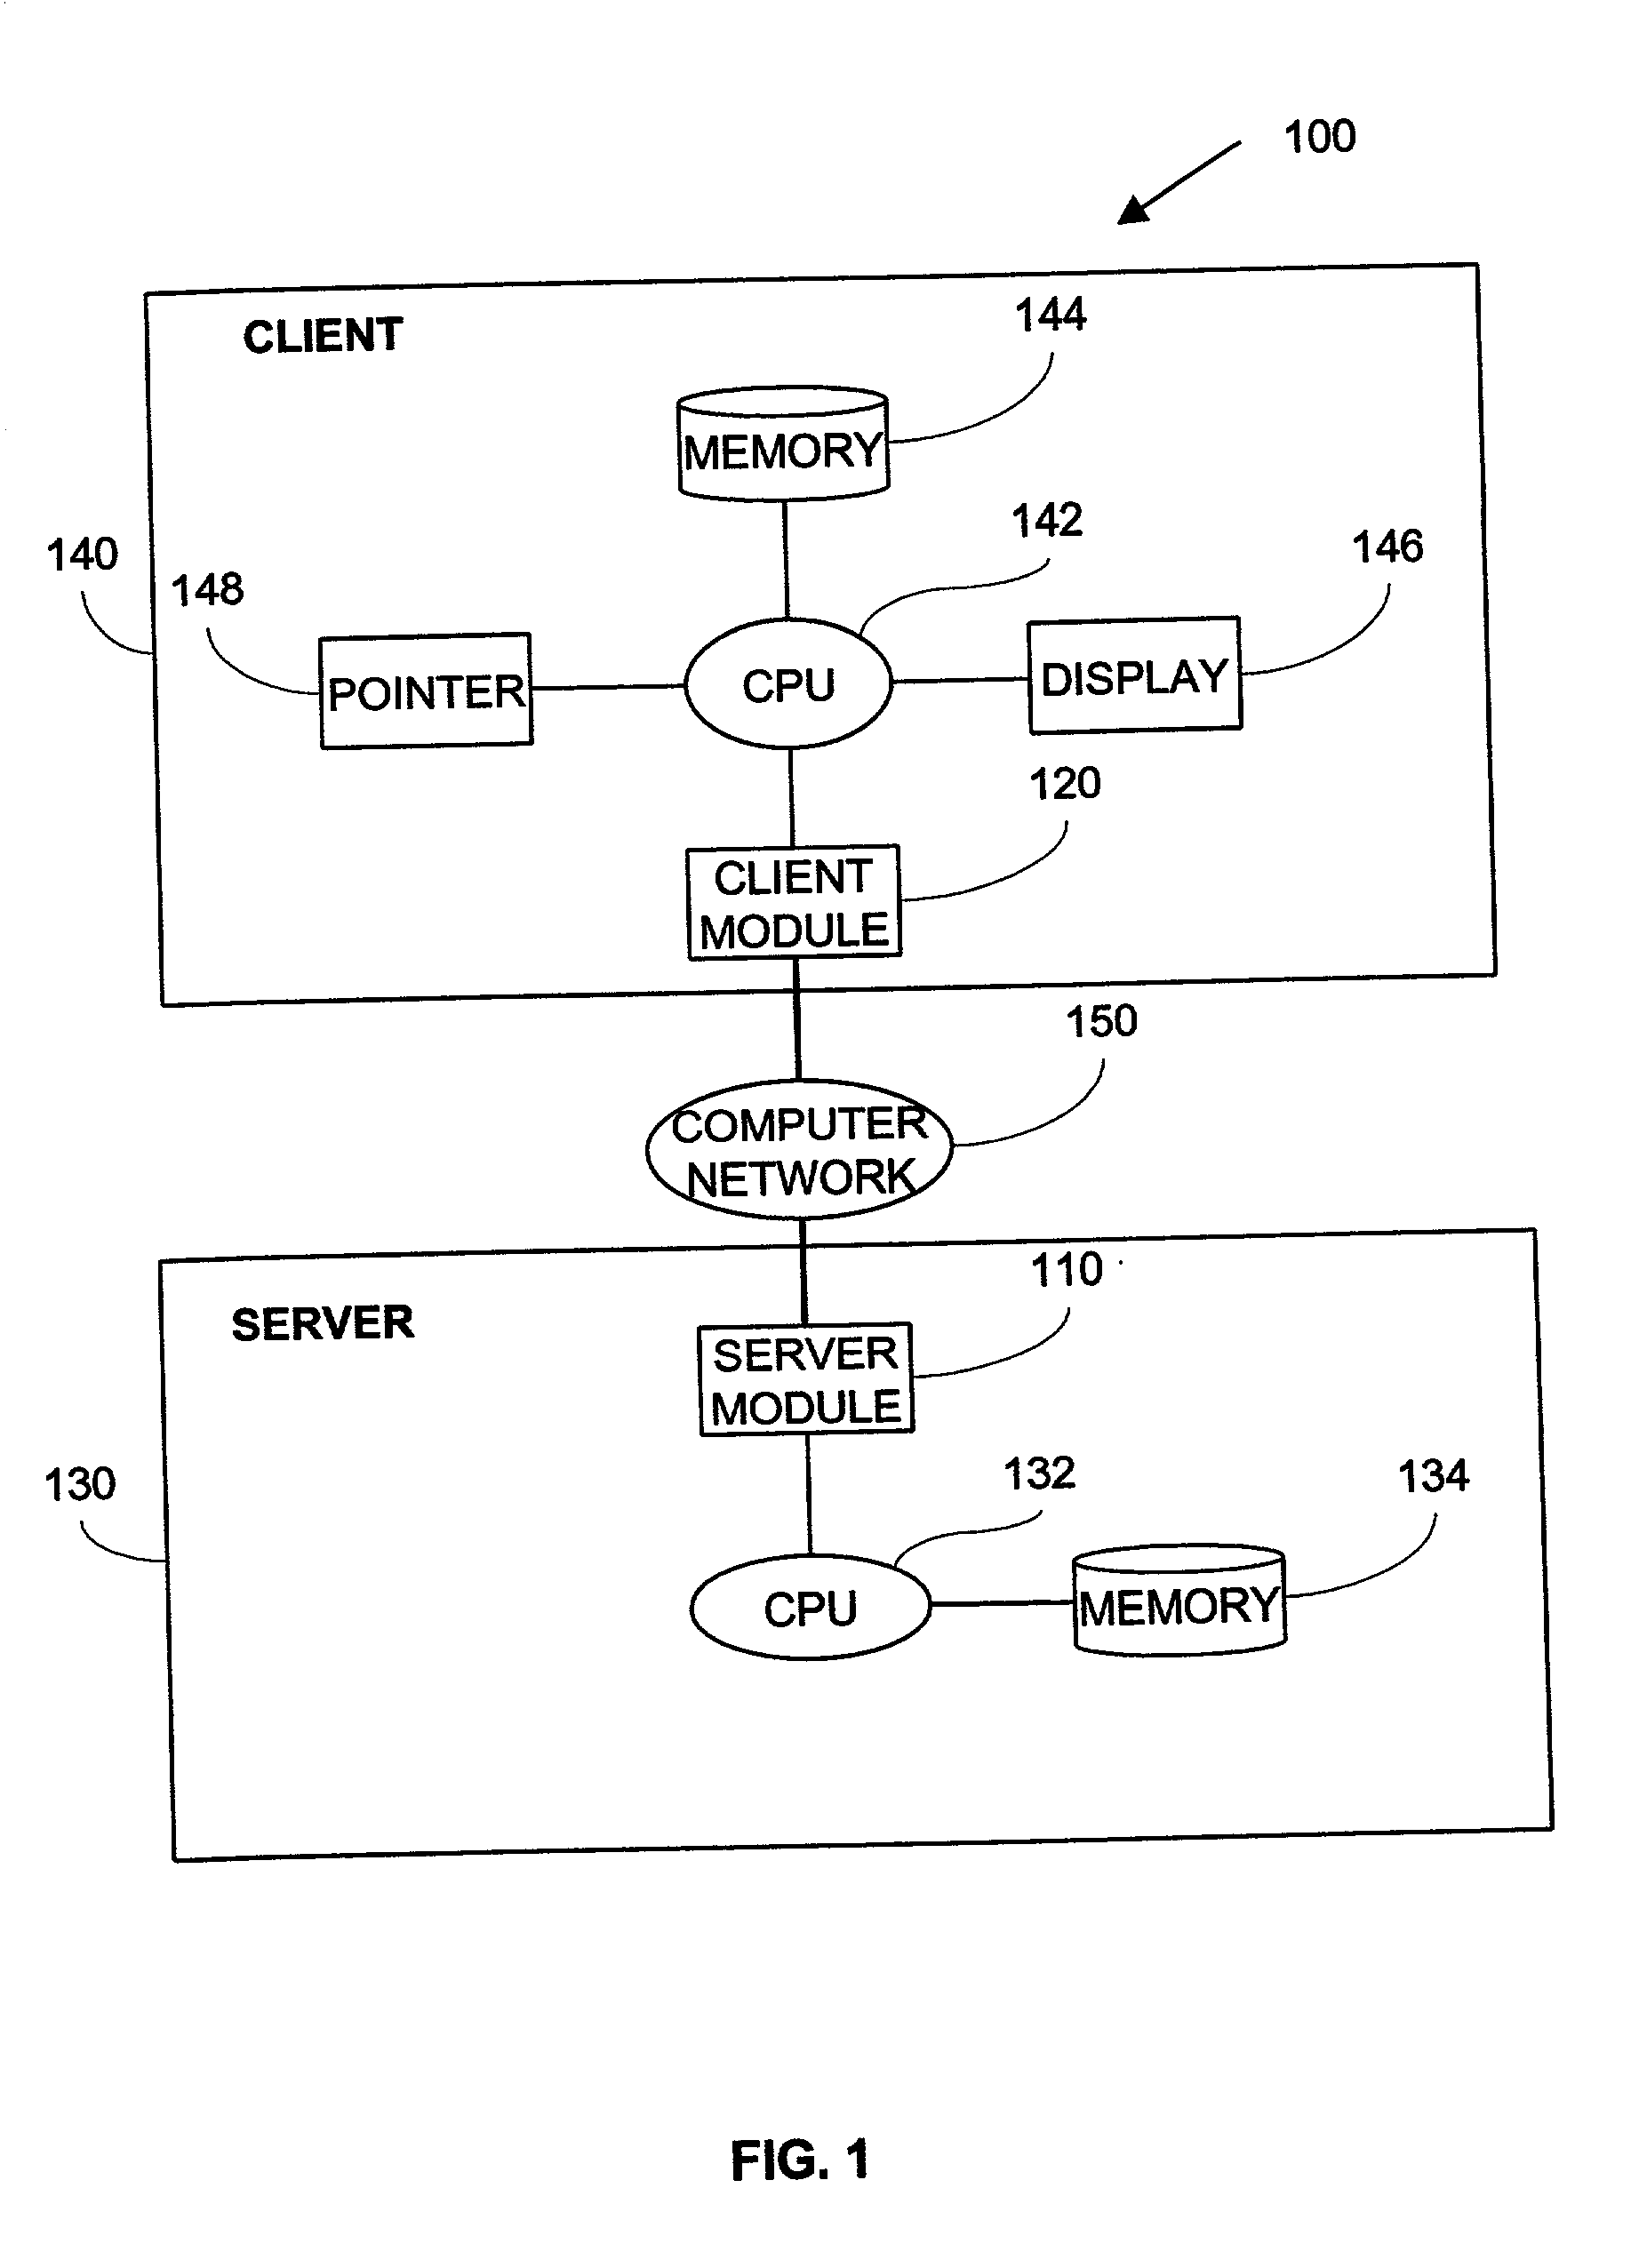 System and method for delivery of documents over a computer network